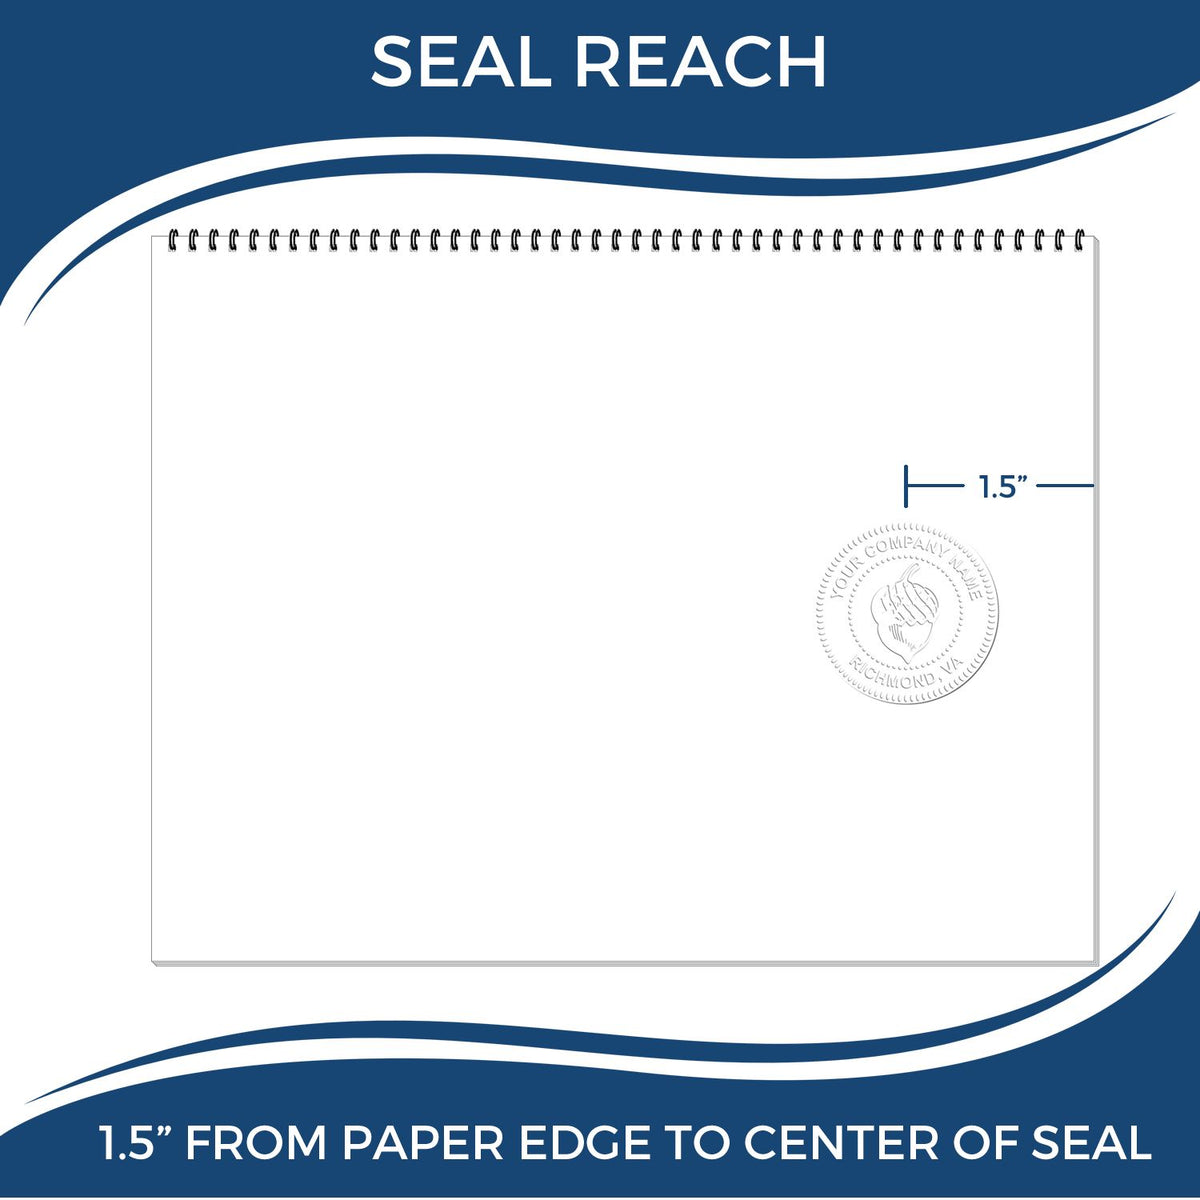 An infographic showing the seal reach which is represented by a ruler and a miniature seal image of the Hybrid Guam Architect Seal